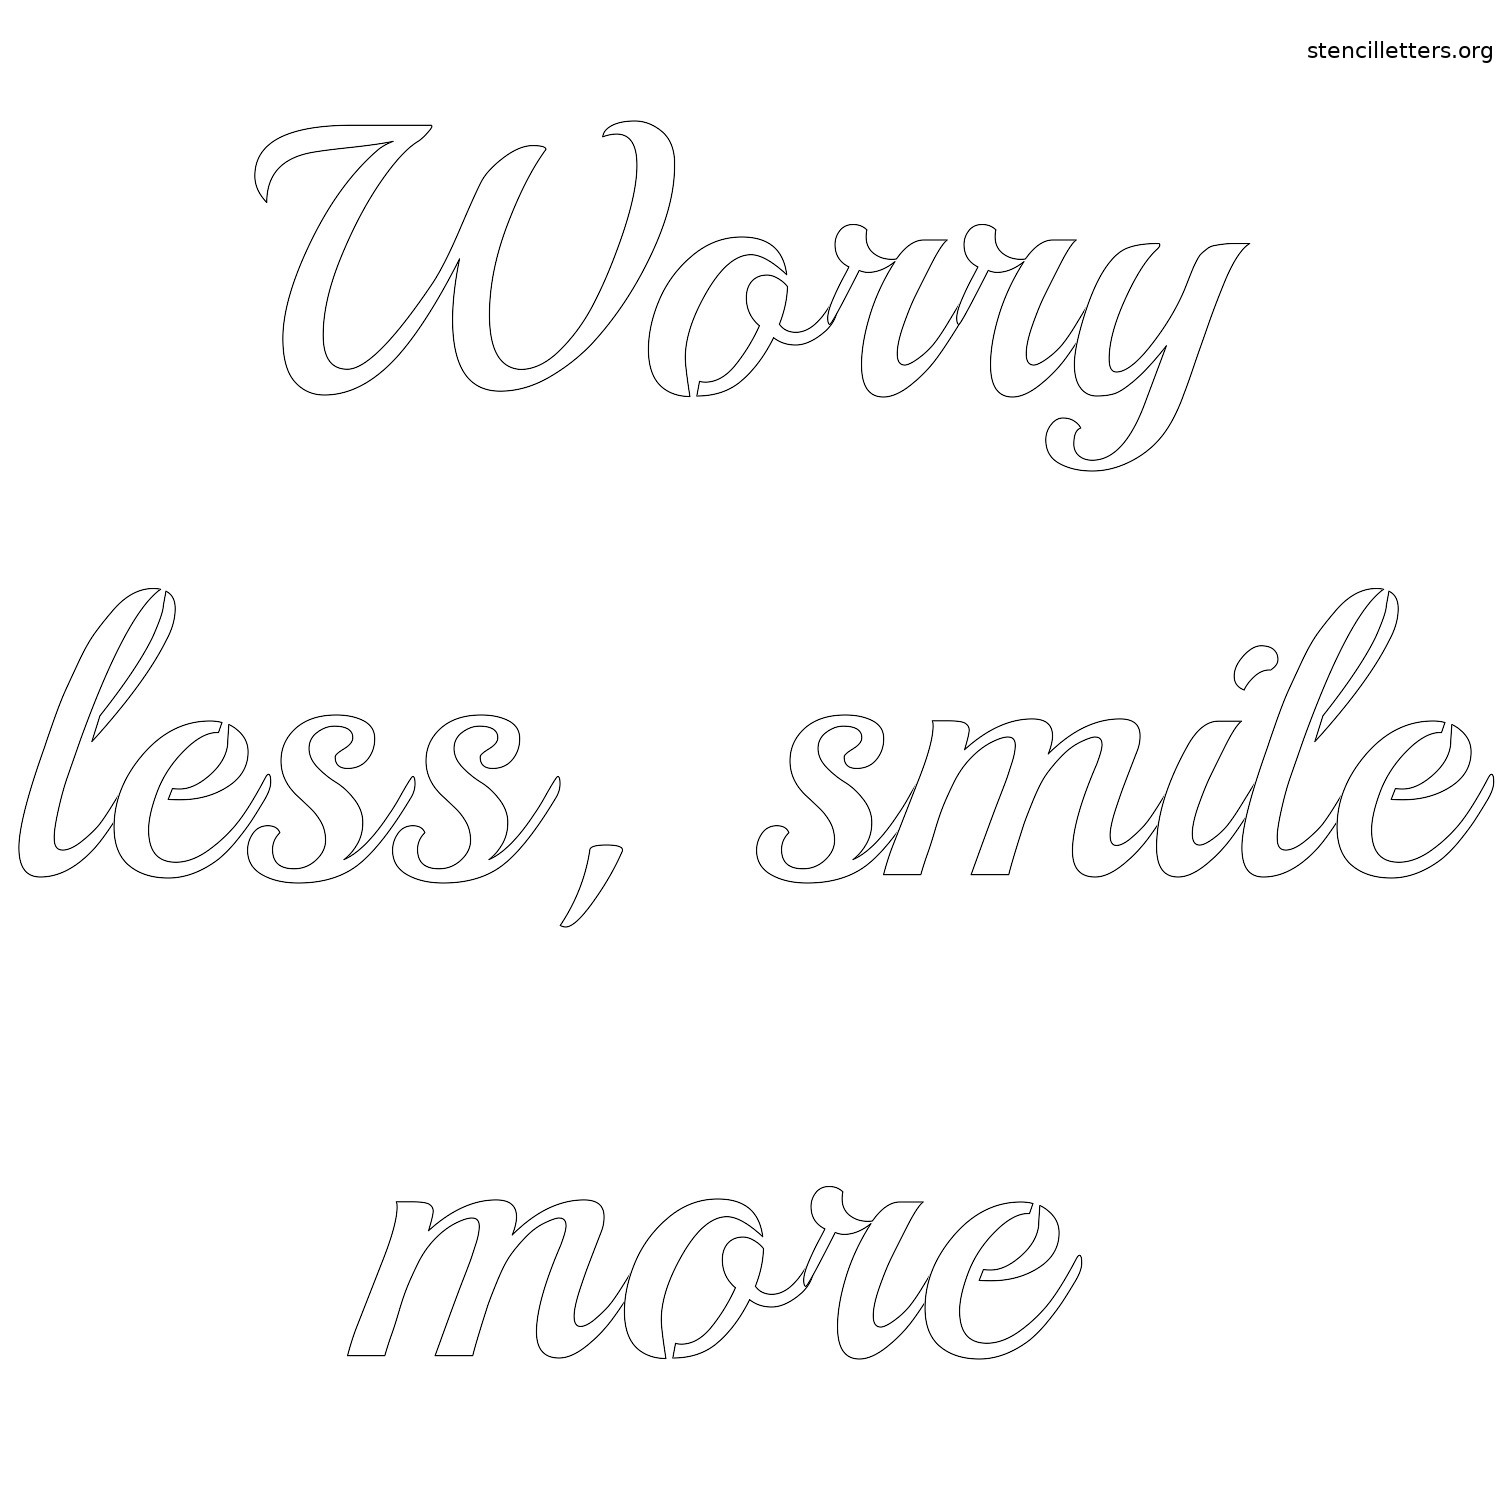 worry-less-smile-more-quote-stencil-outline.jpg